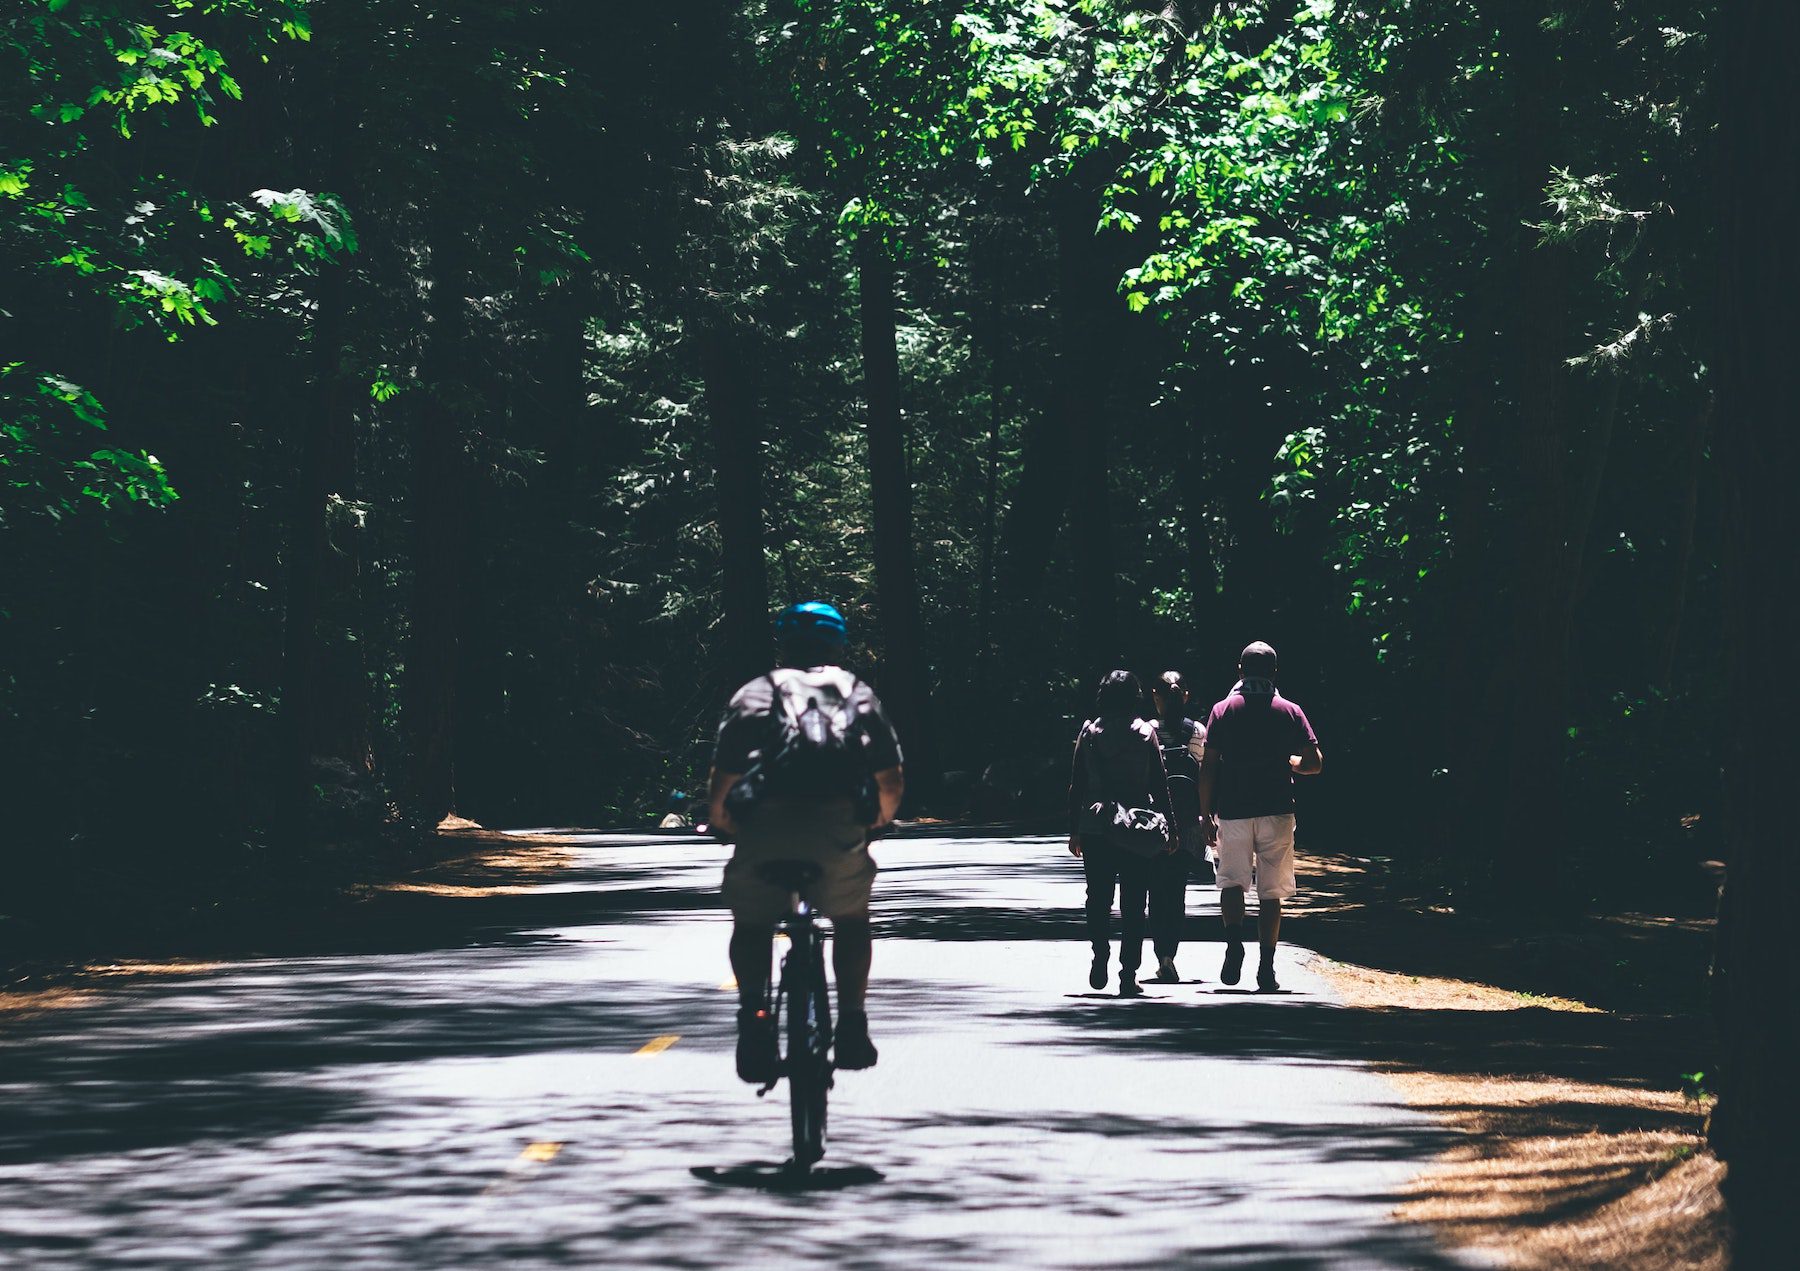 Cyclists biking on paved road through lush green forest with dappled sunlight.